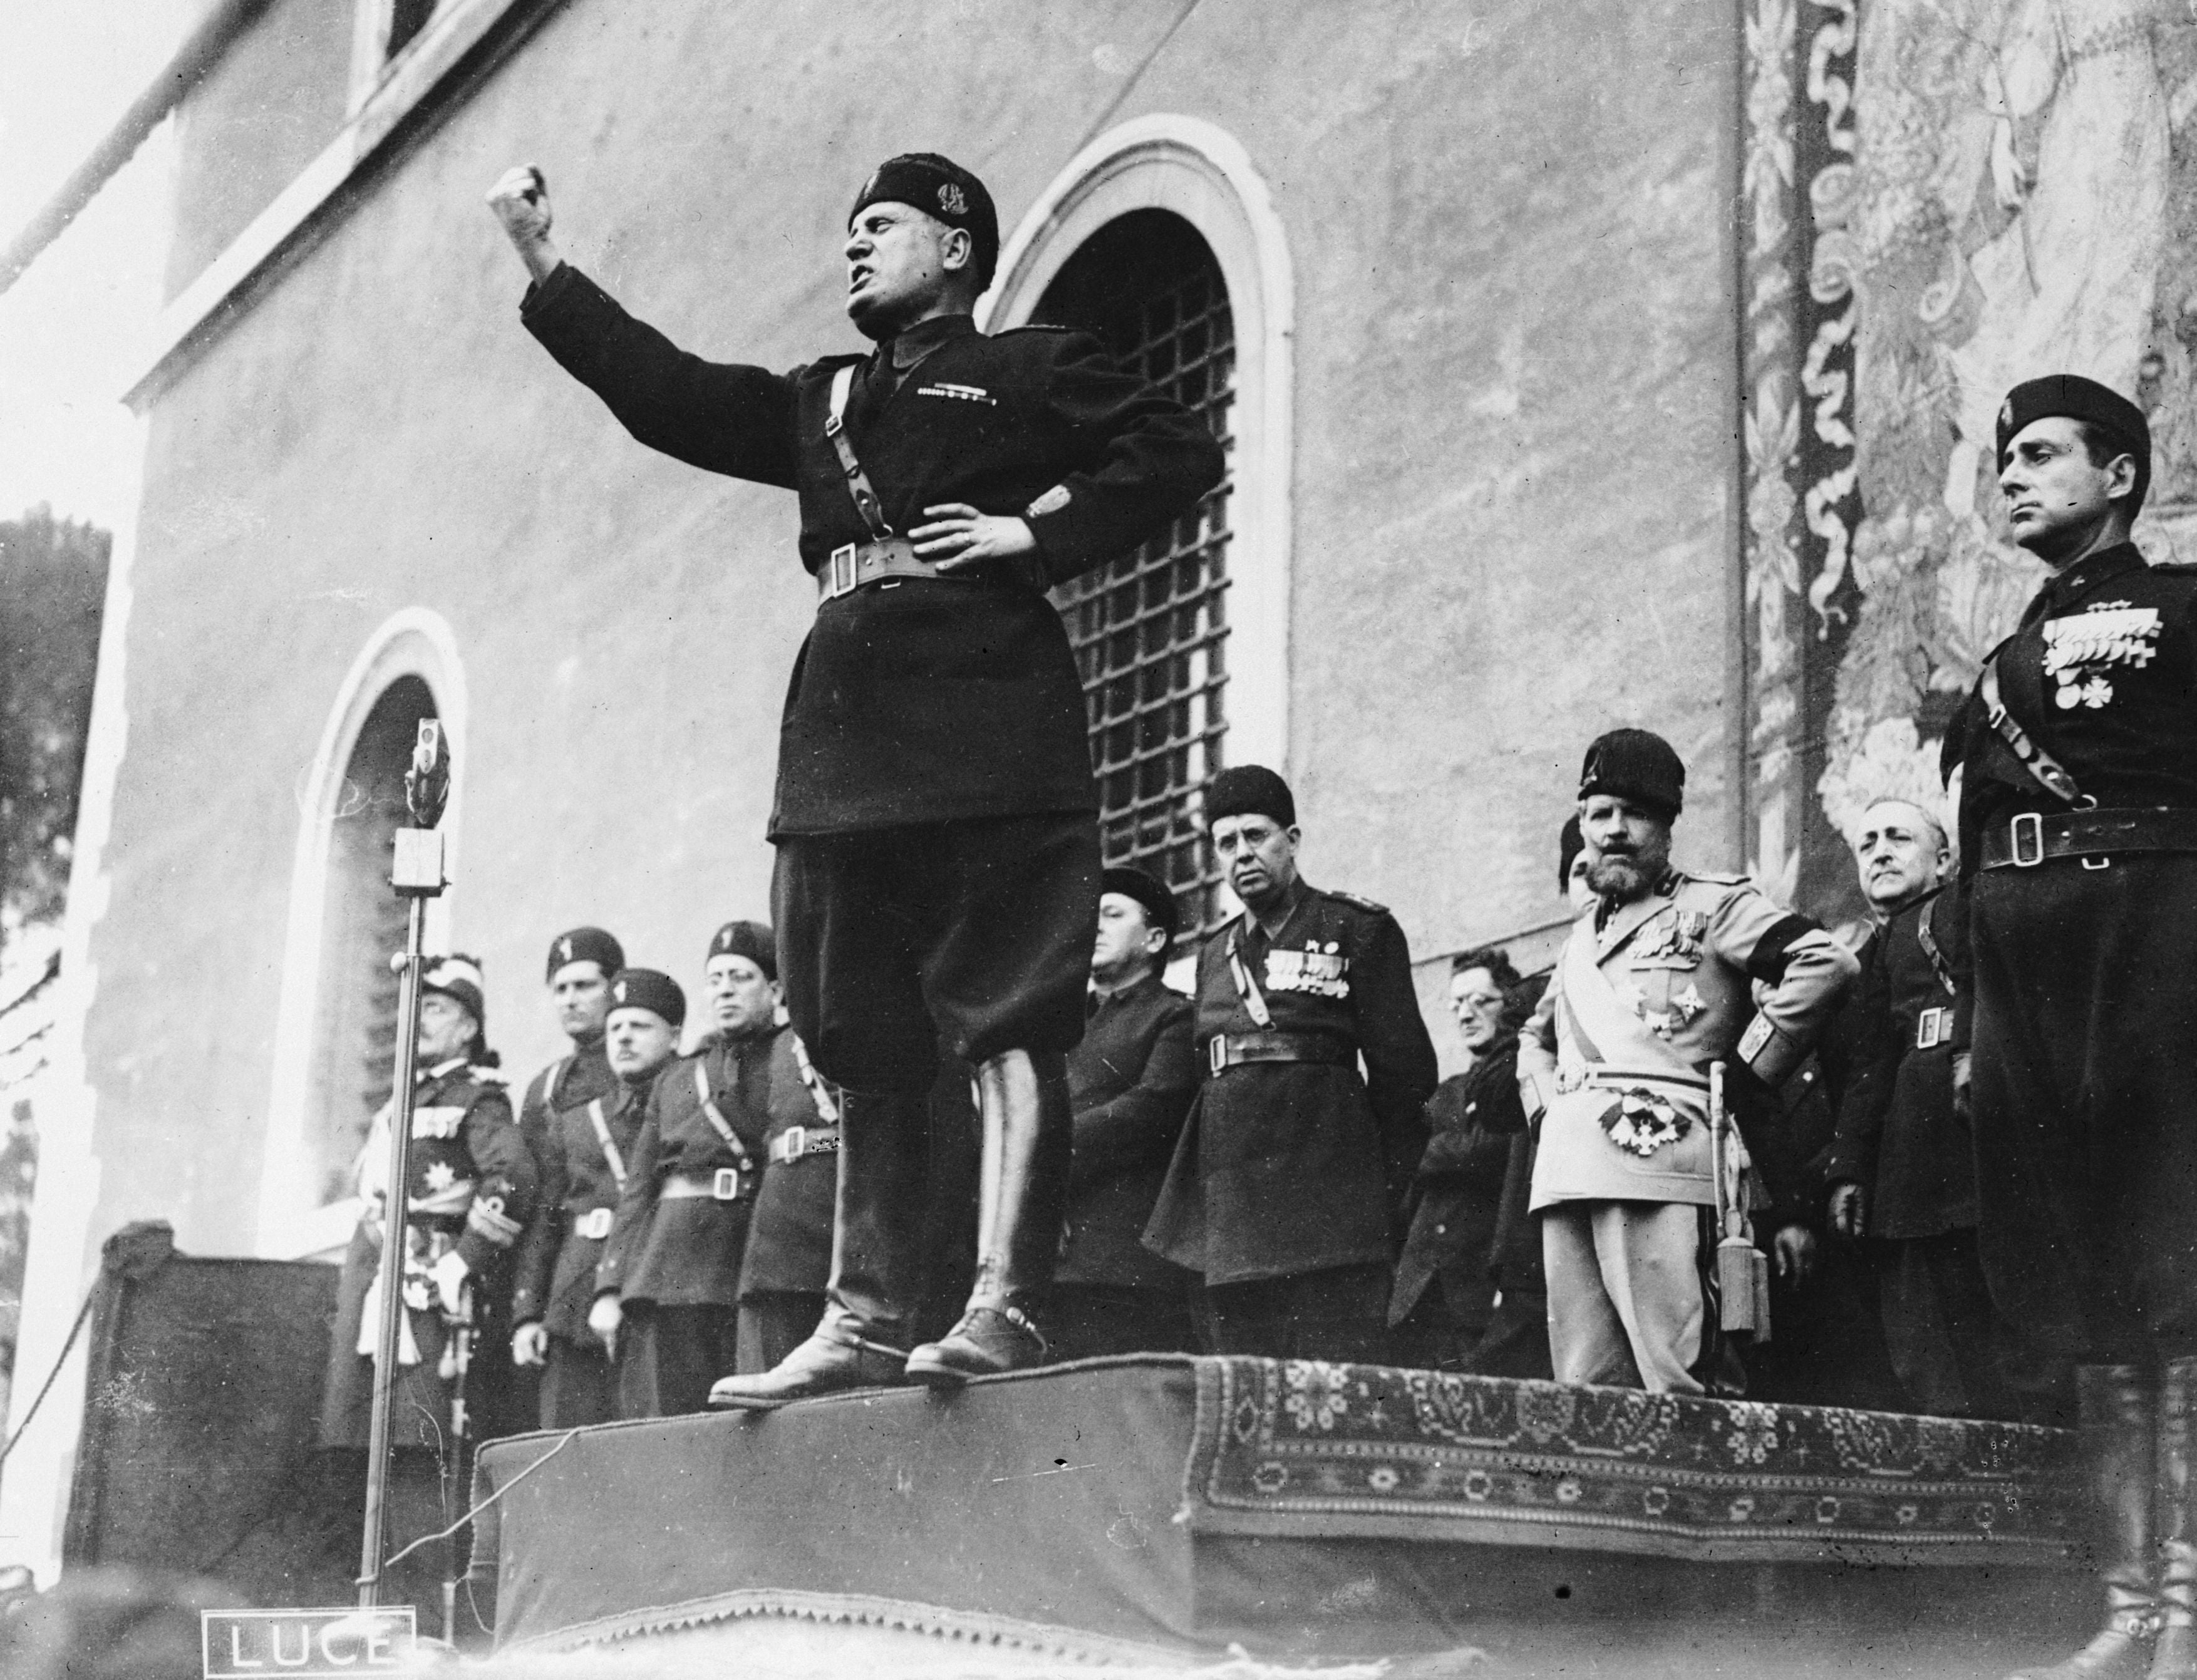 ‘Matter is matter’: Levi clung to scientific certainties in the face of Mussolini’s horrors